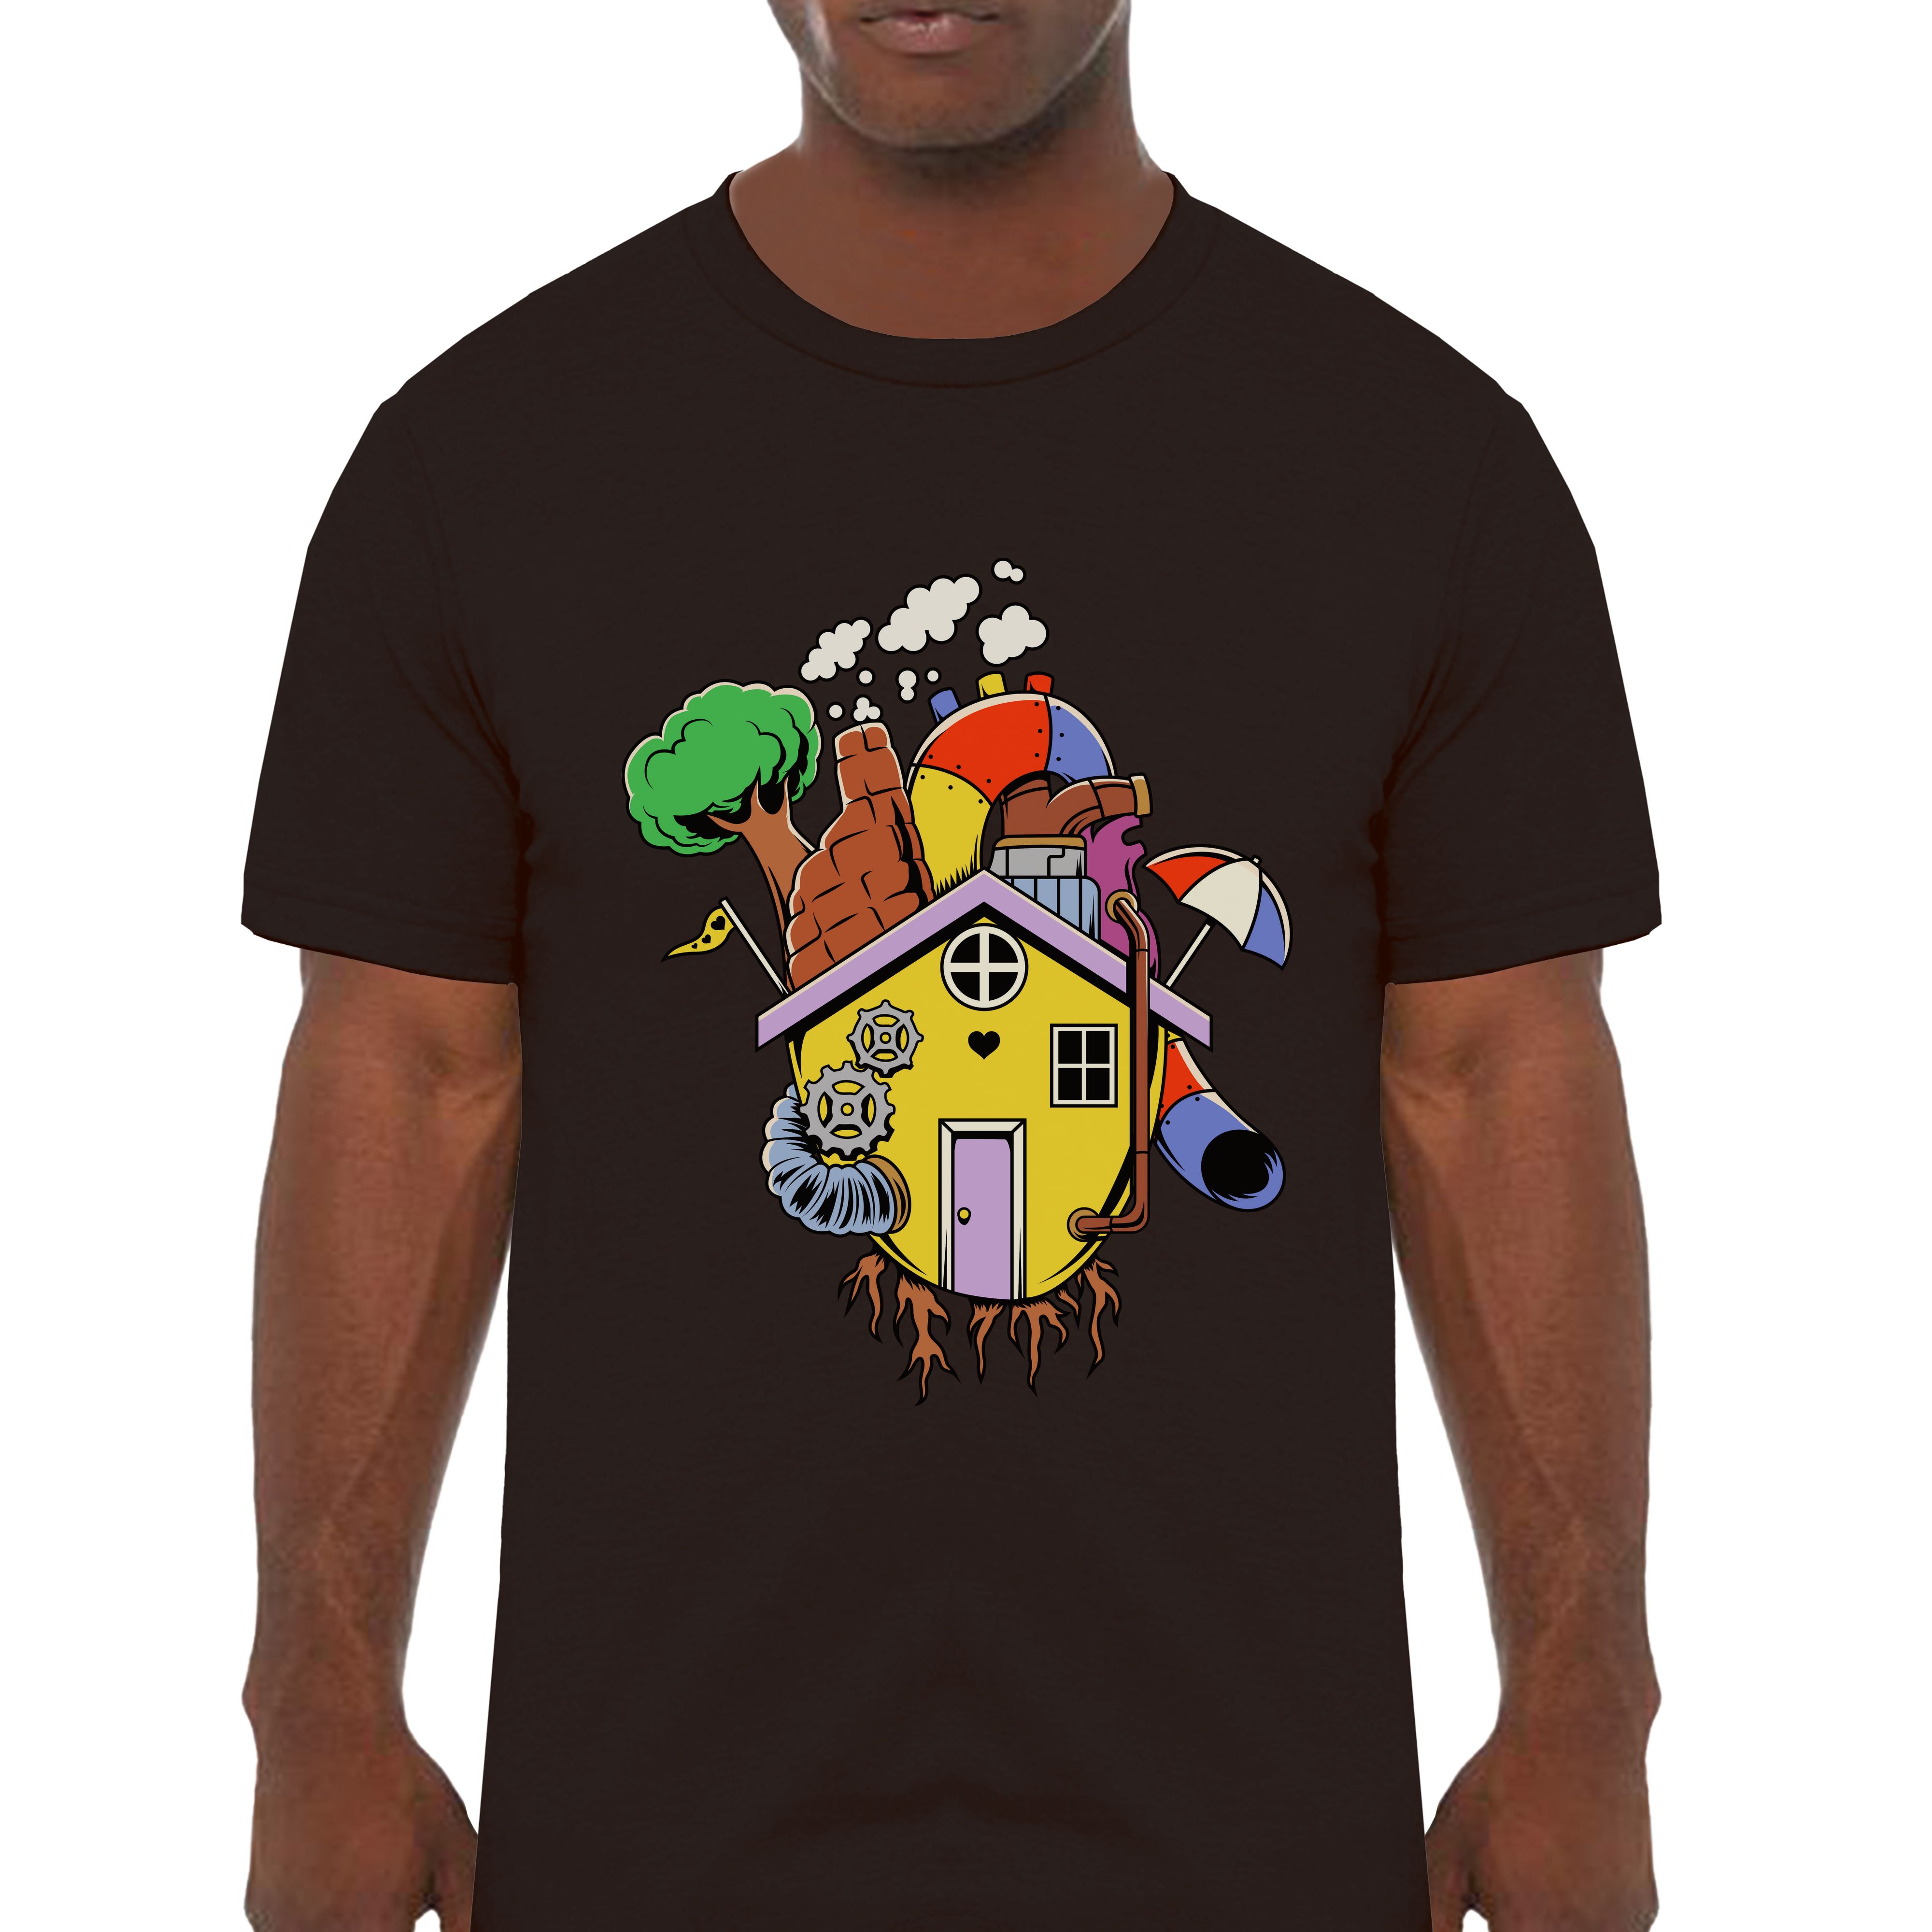 Your Heart is my House Classic Graphic T-Shirt - Cuztom Threadz